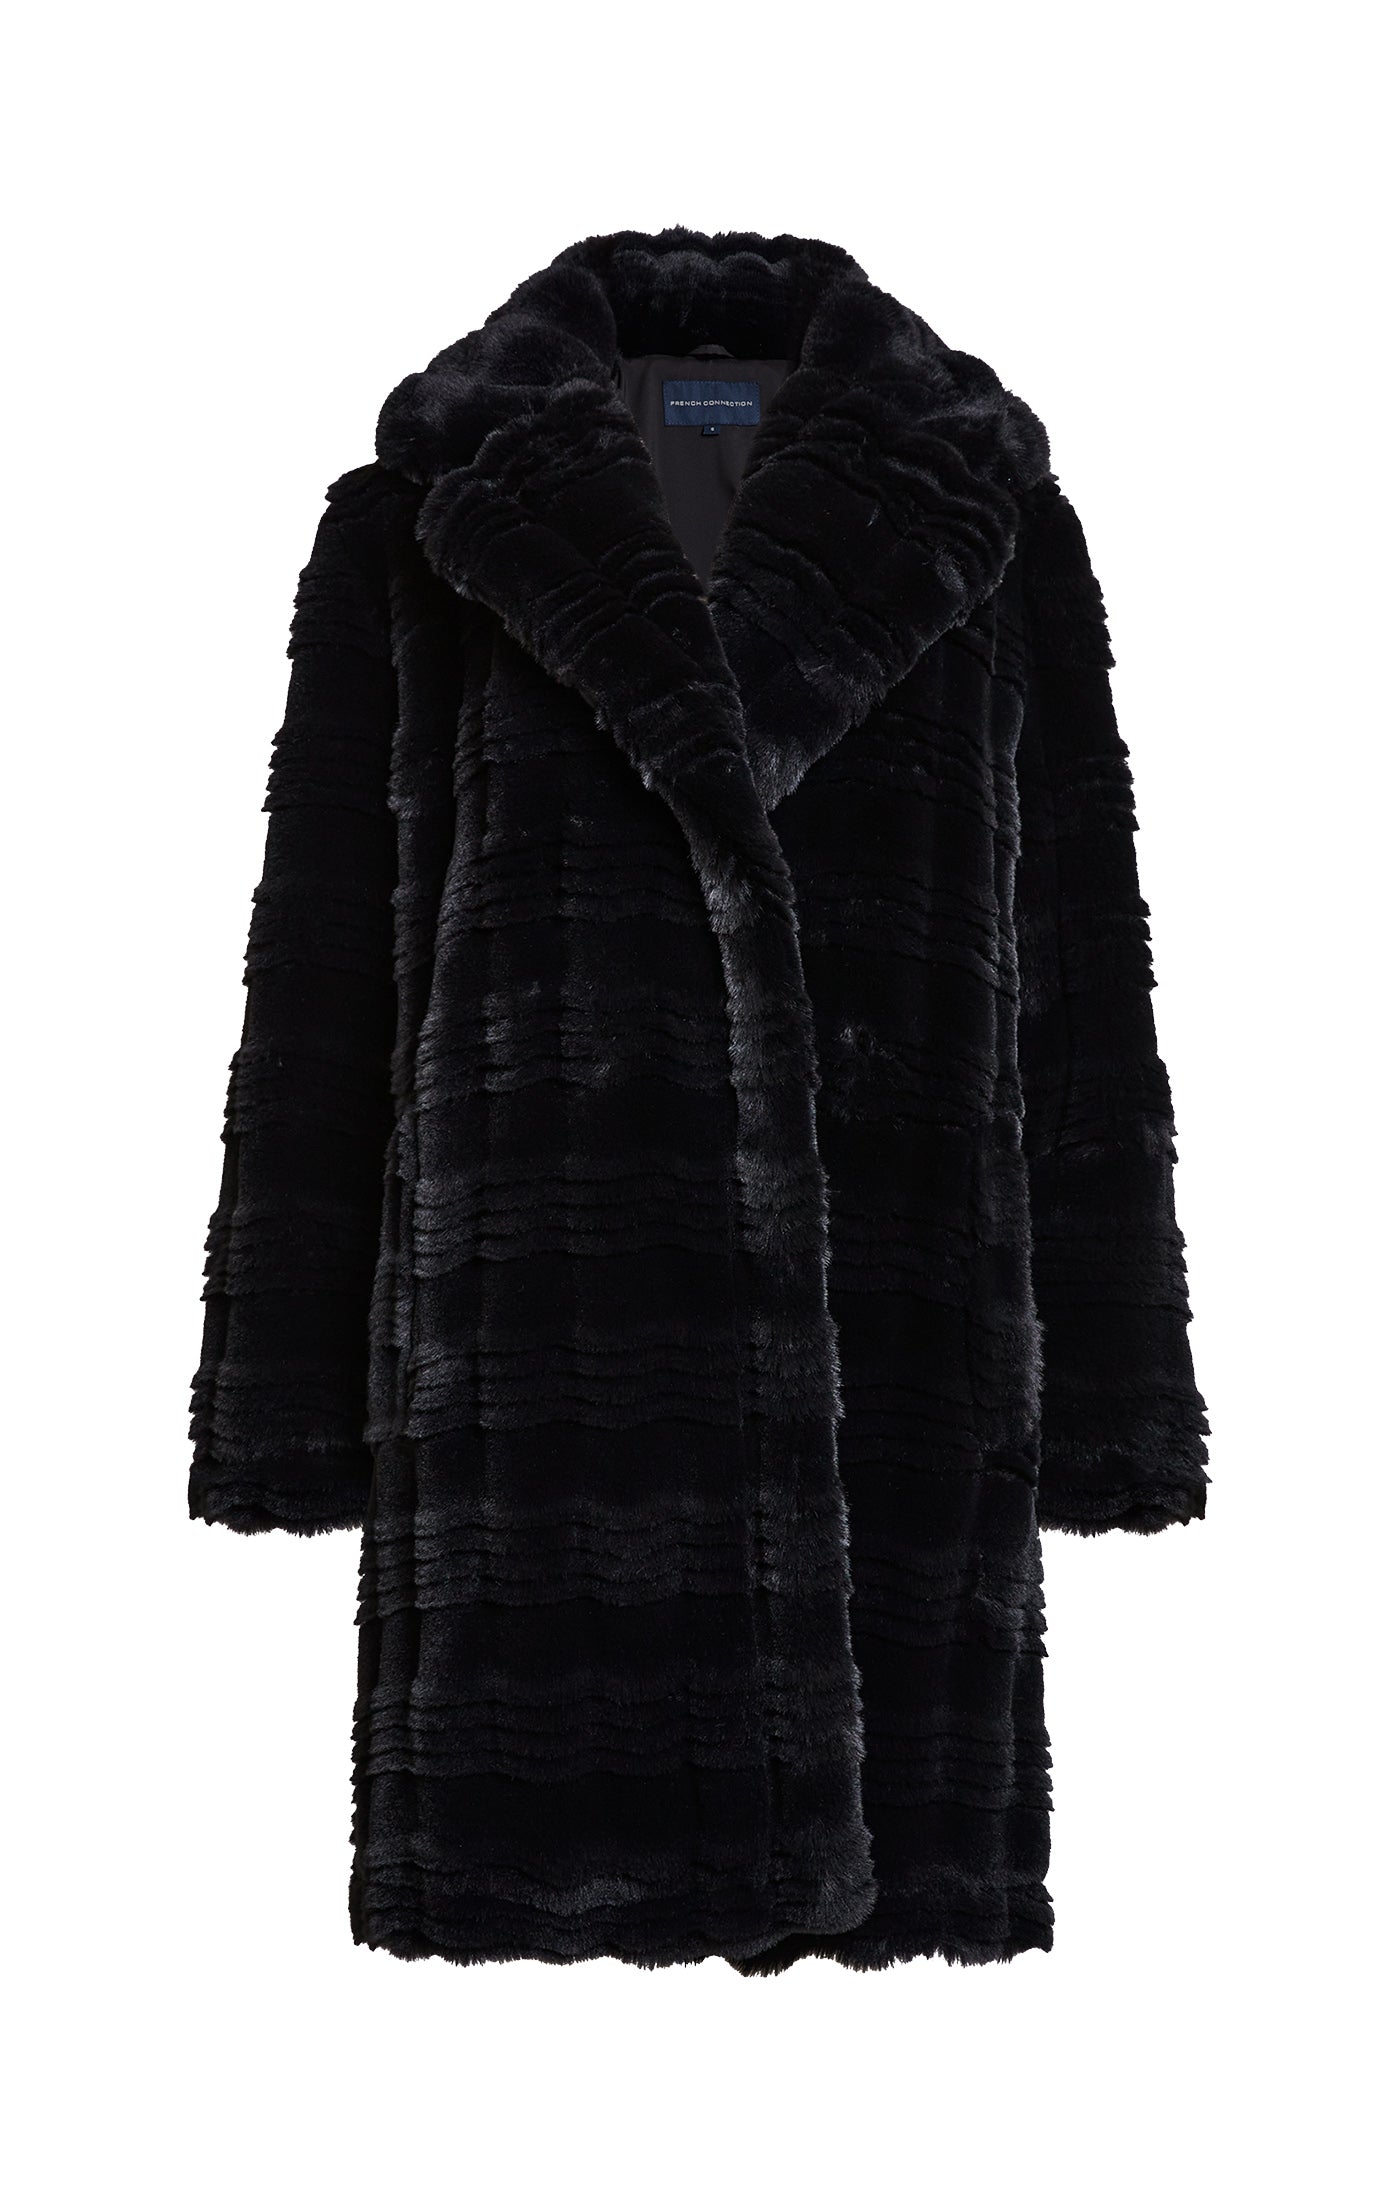 French Connection Daryn Faux Fur Coat Blackout 70VAI